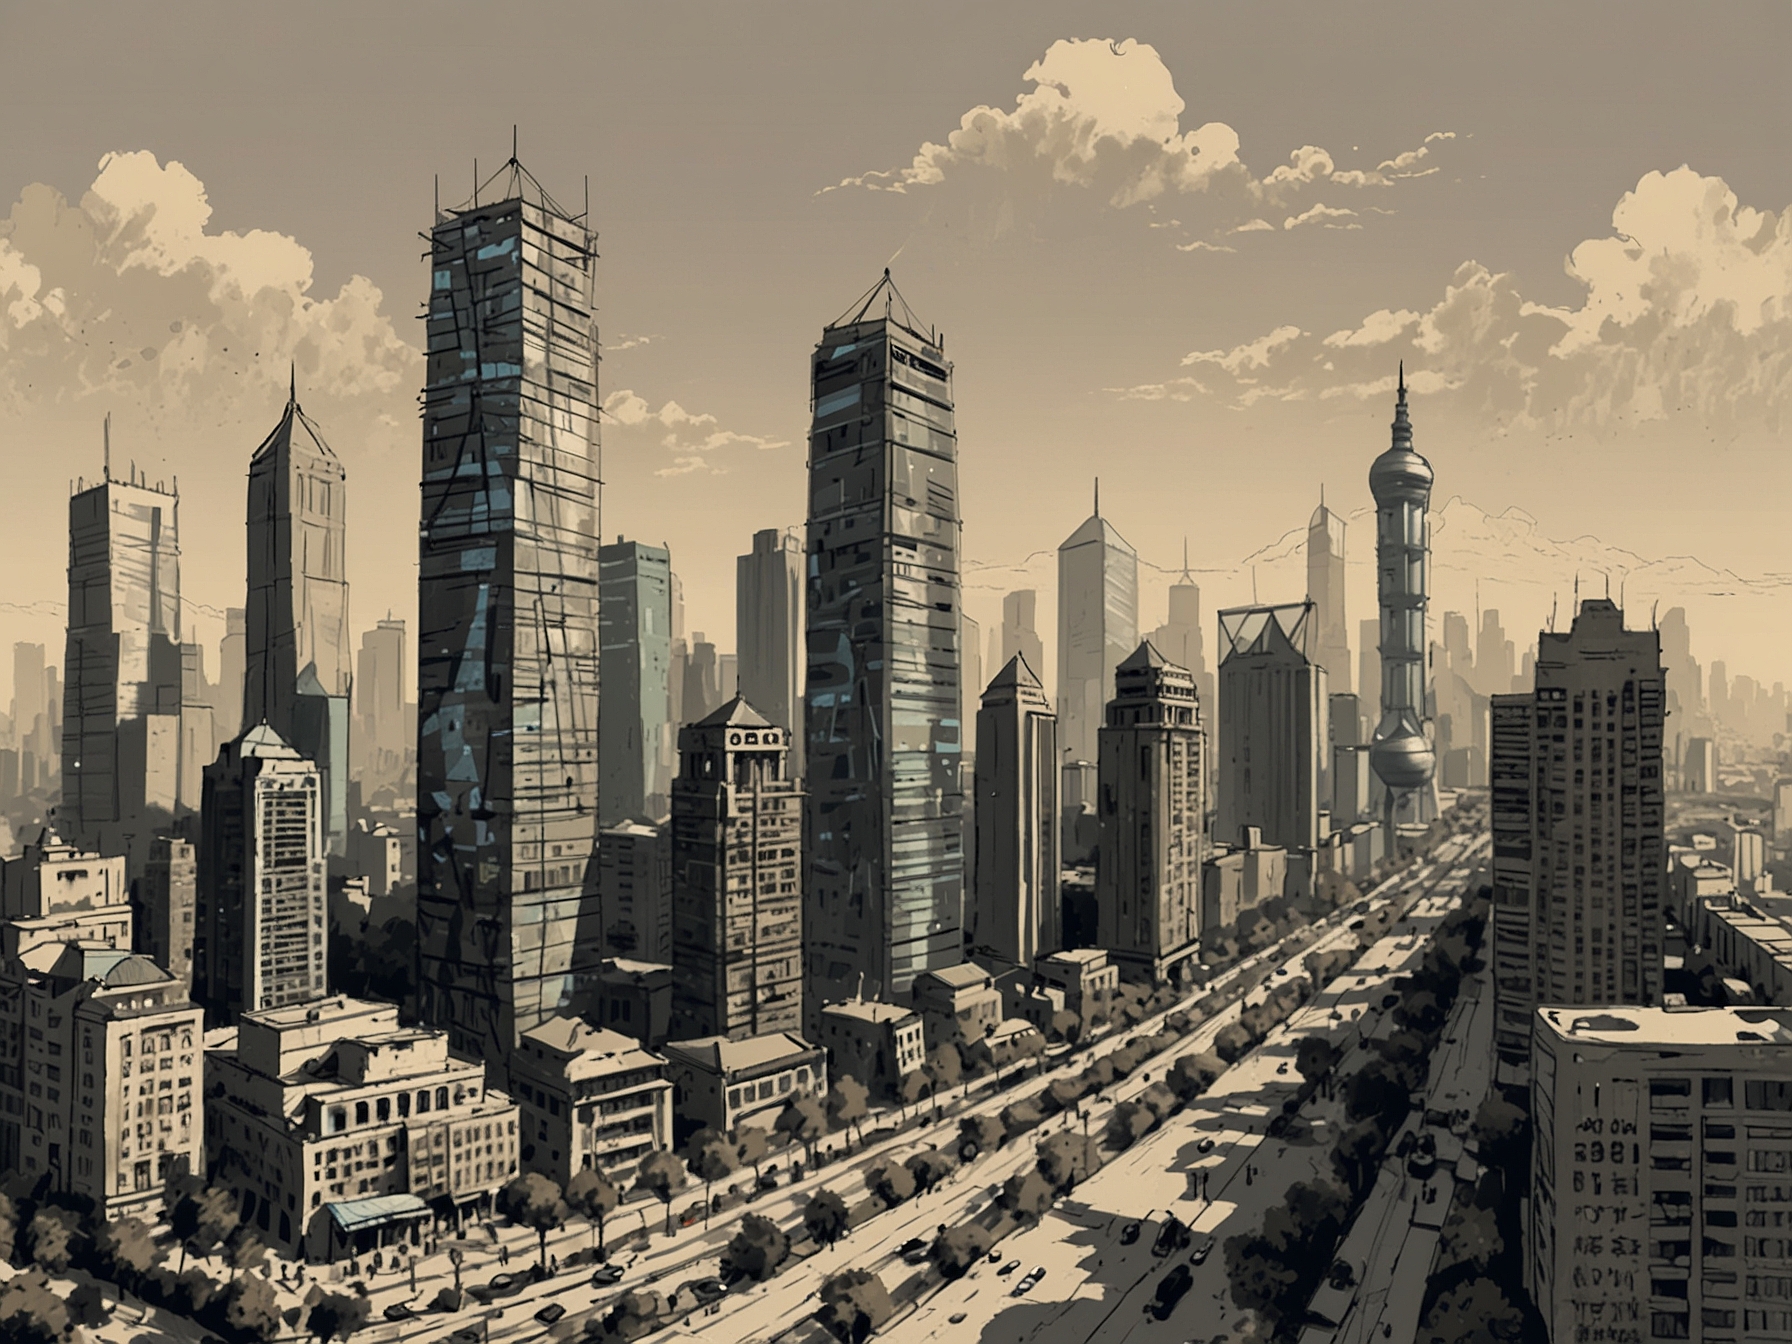 A cityscape of a Chinese urban area, symbolizing the challenges in China’s property sector affecting commodity markets.